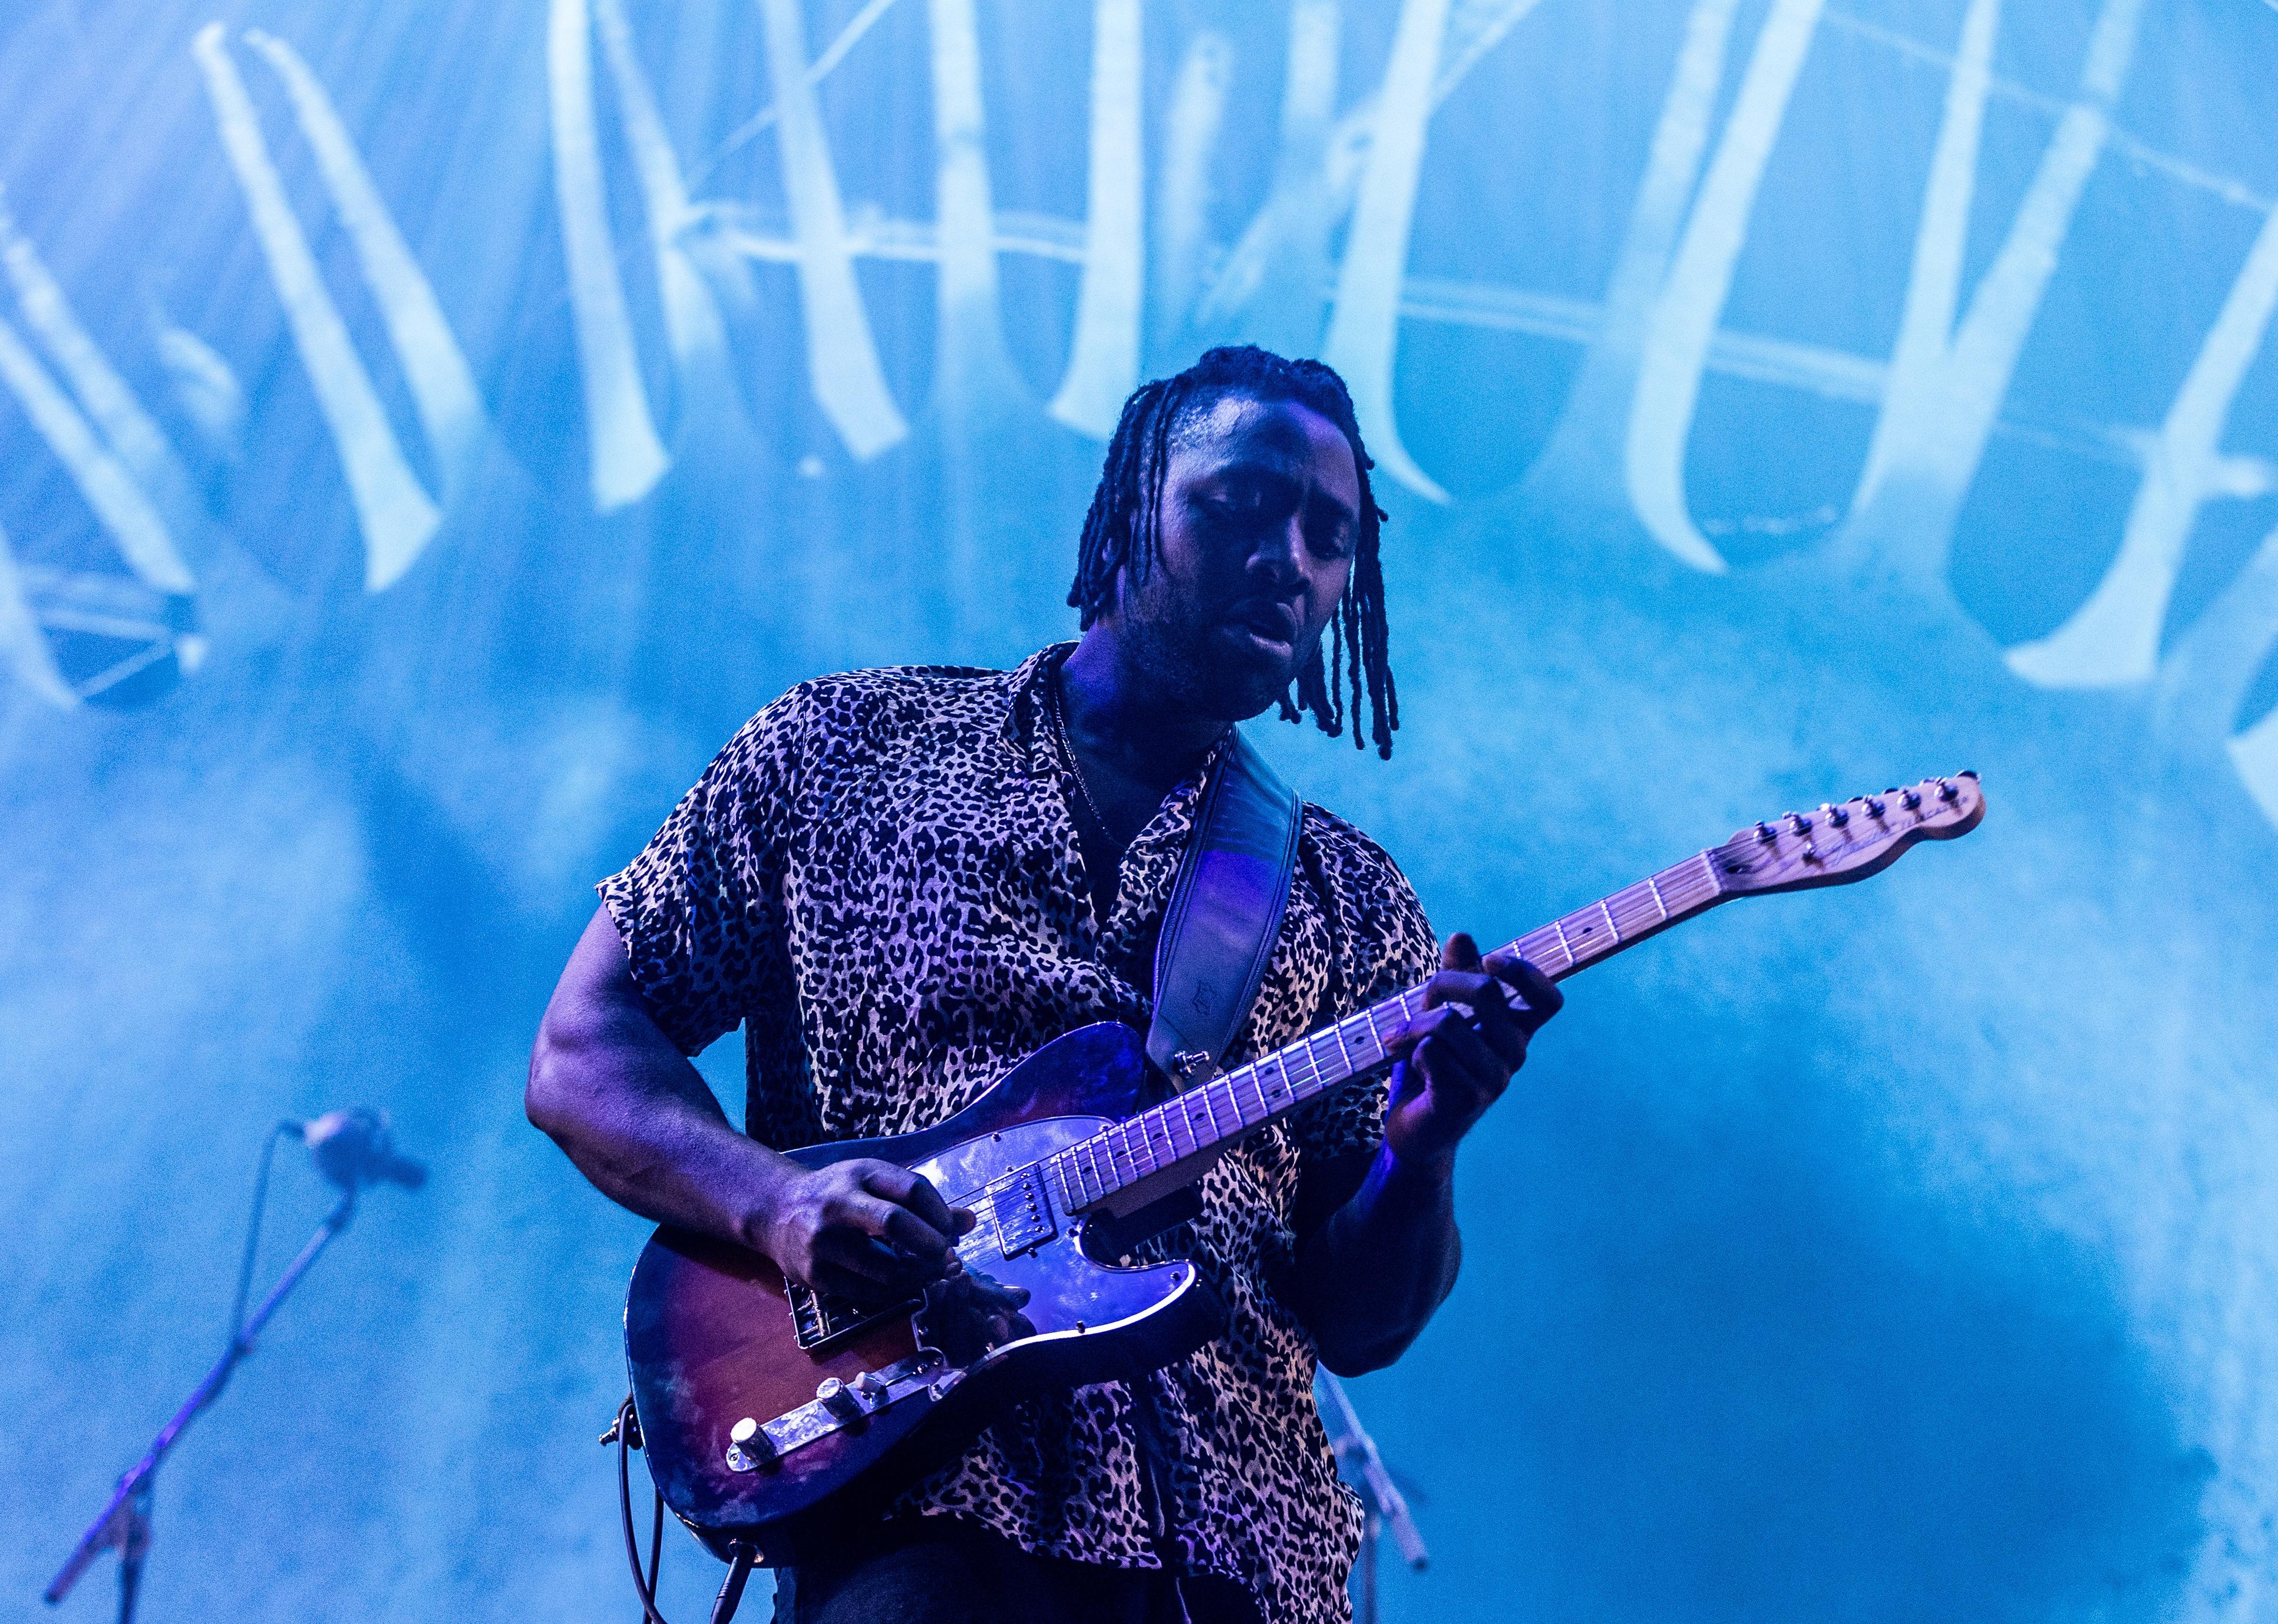 Kele playing guitar onstage in a leopard print shirt.